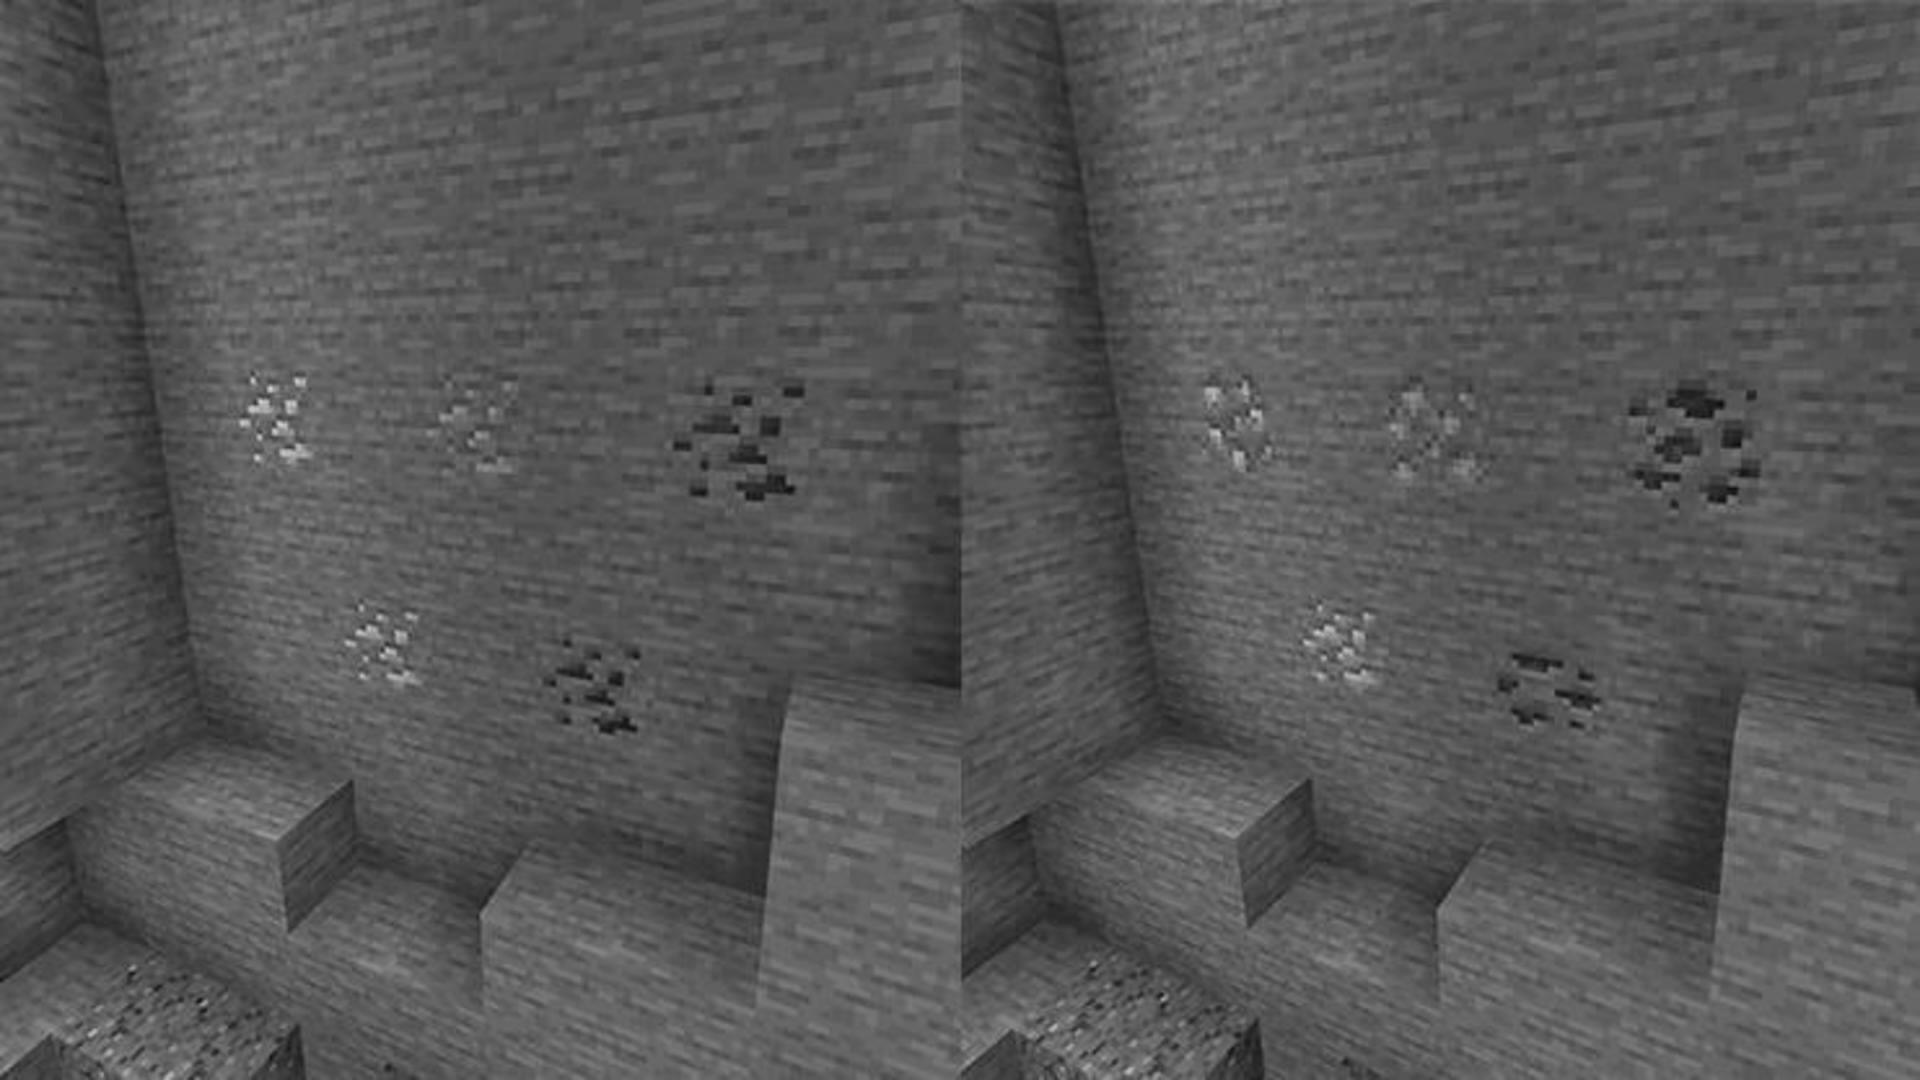 A black-and-white comparison of ore textures in Minecraft.